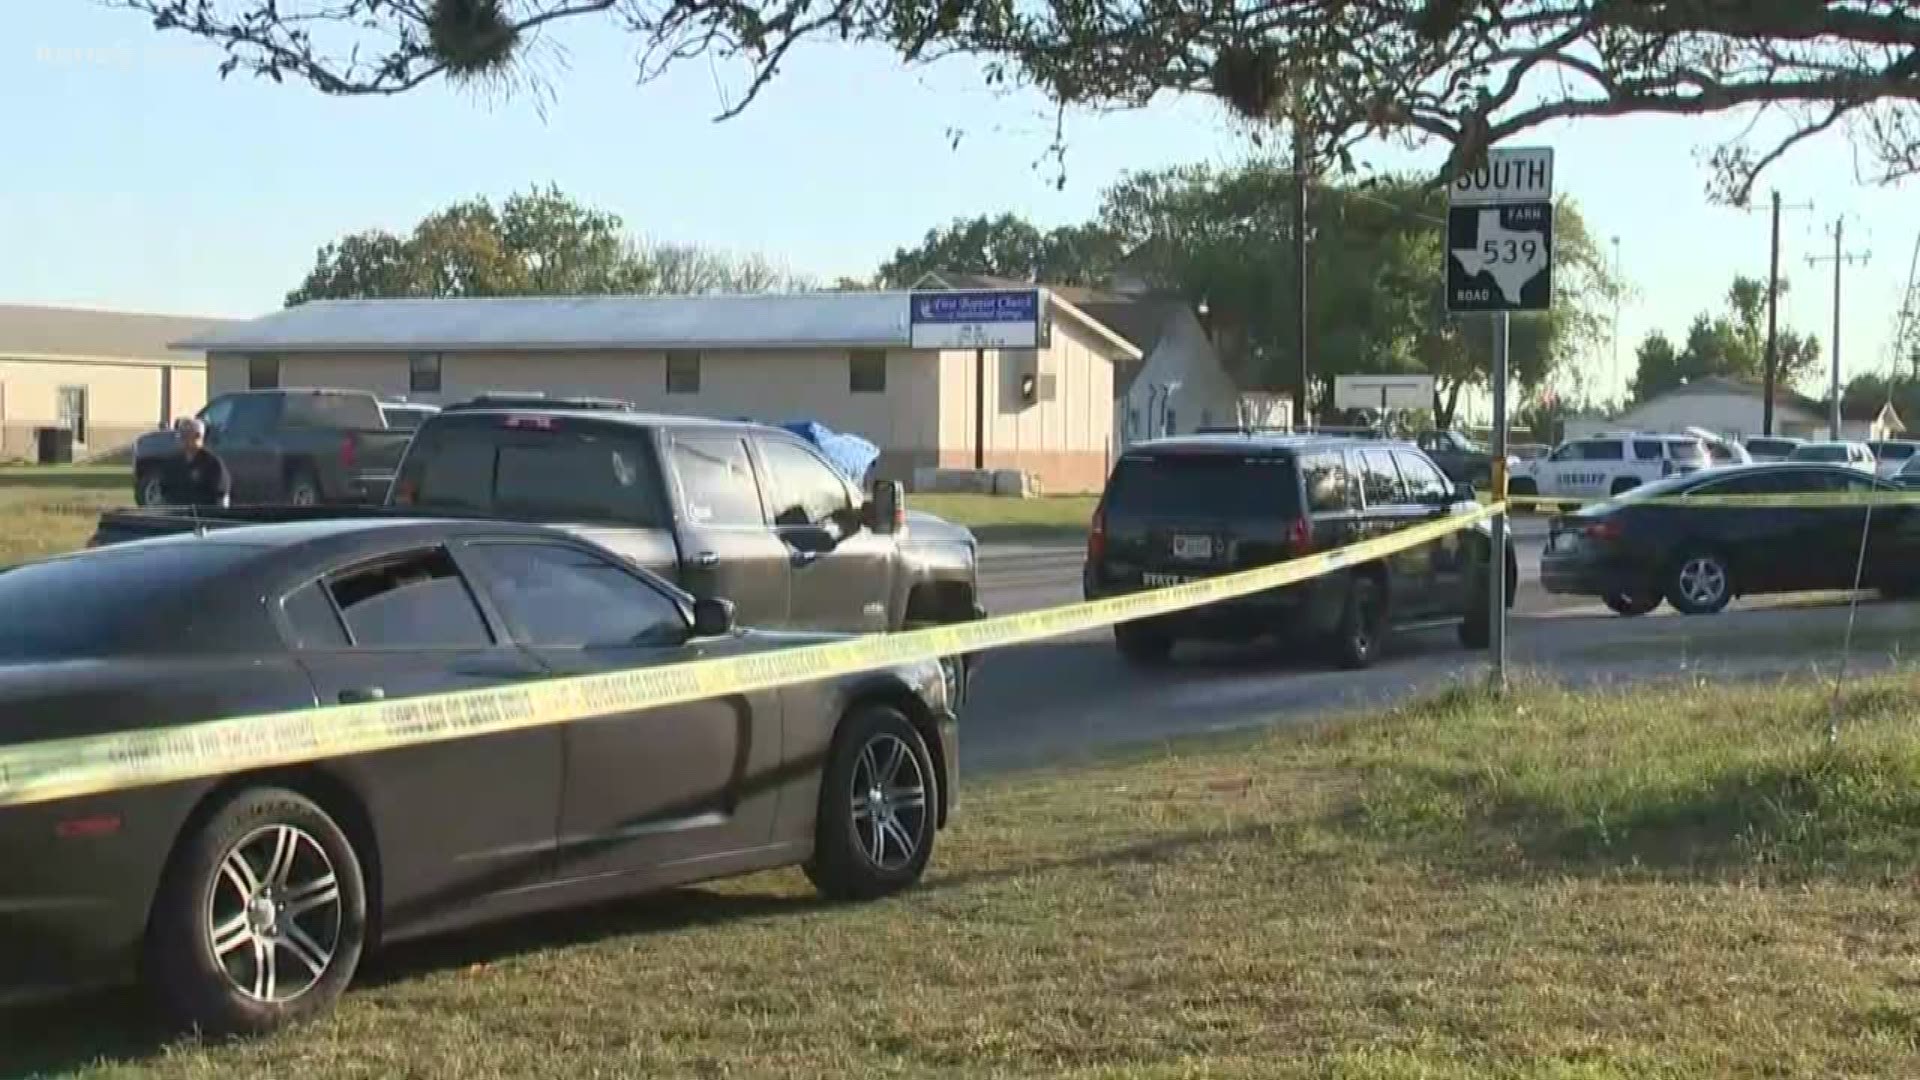 The family who lost nine of its members in the Sutherland Springs church shooting filed a lawsuit against the federal government after they say officials failed to act within the necessary six-month window following the family's claim against the United S